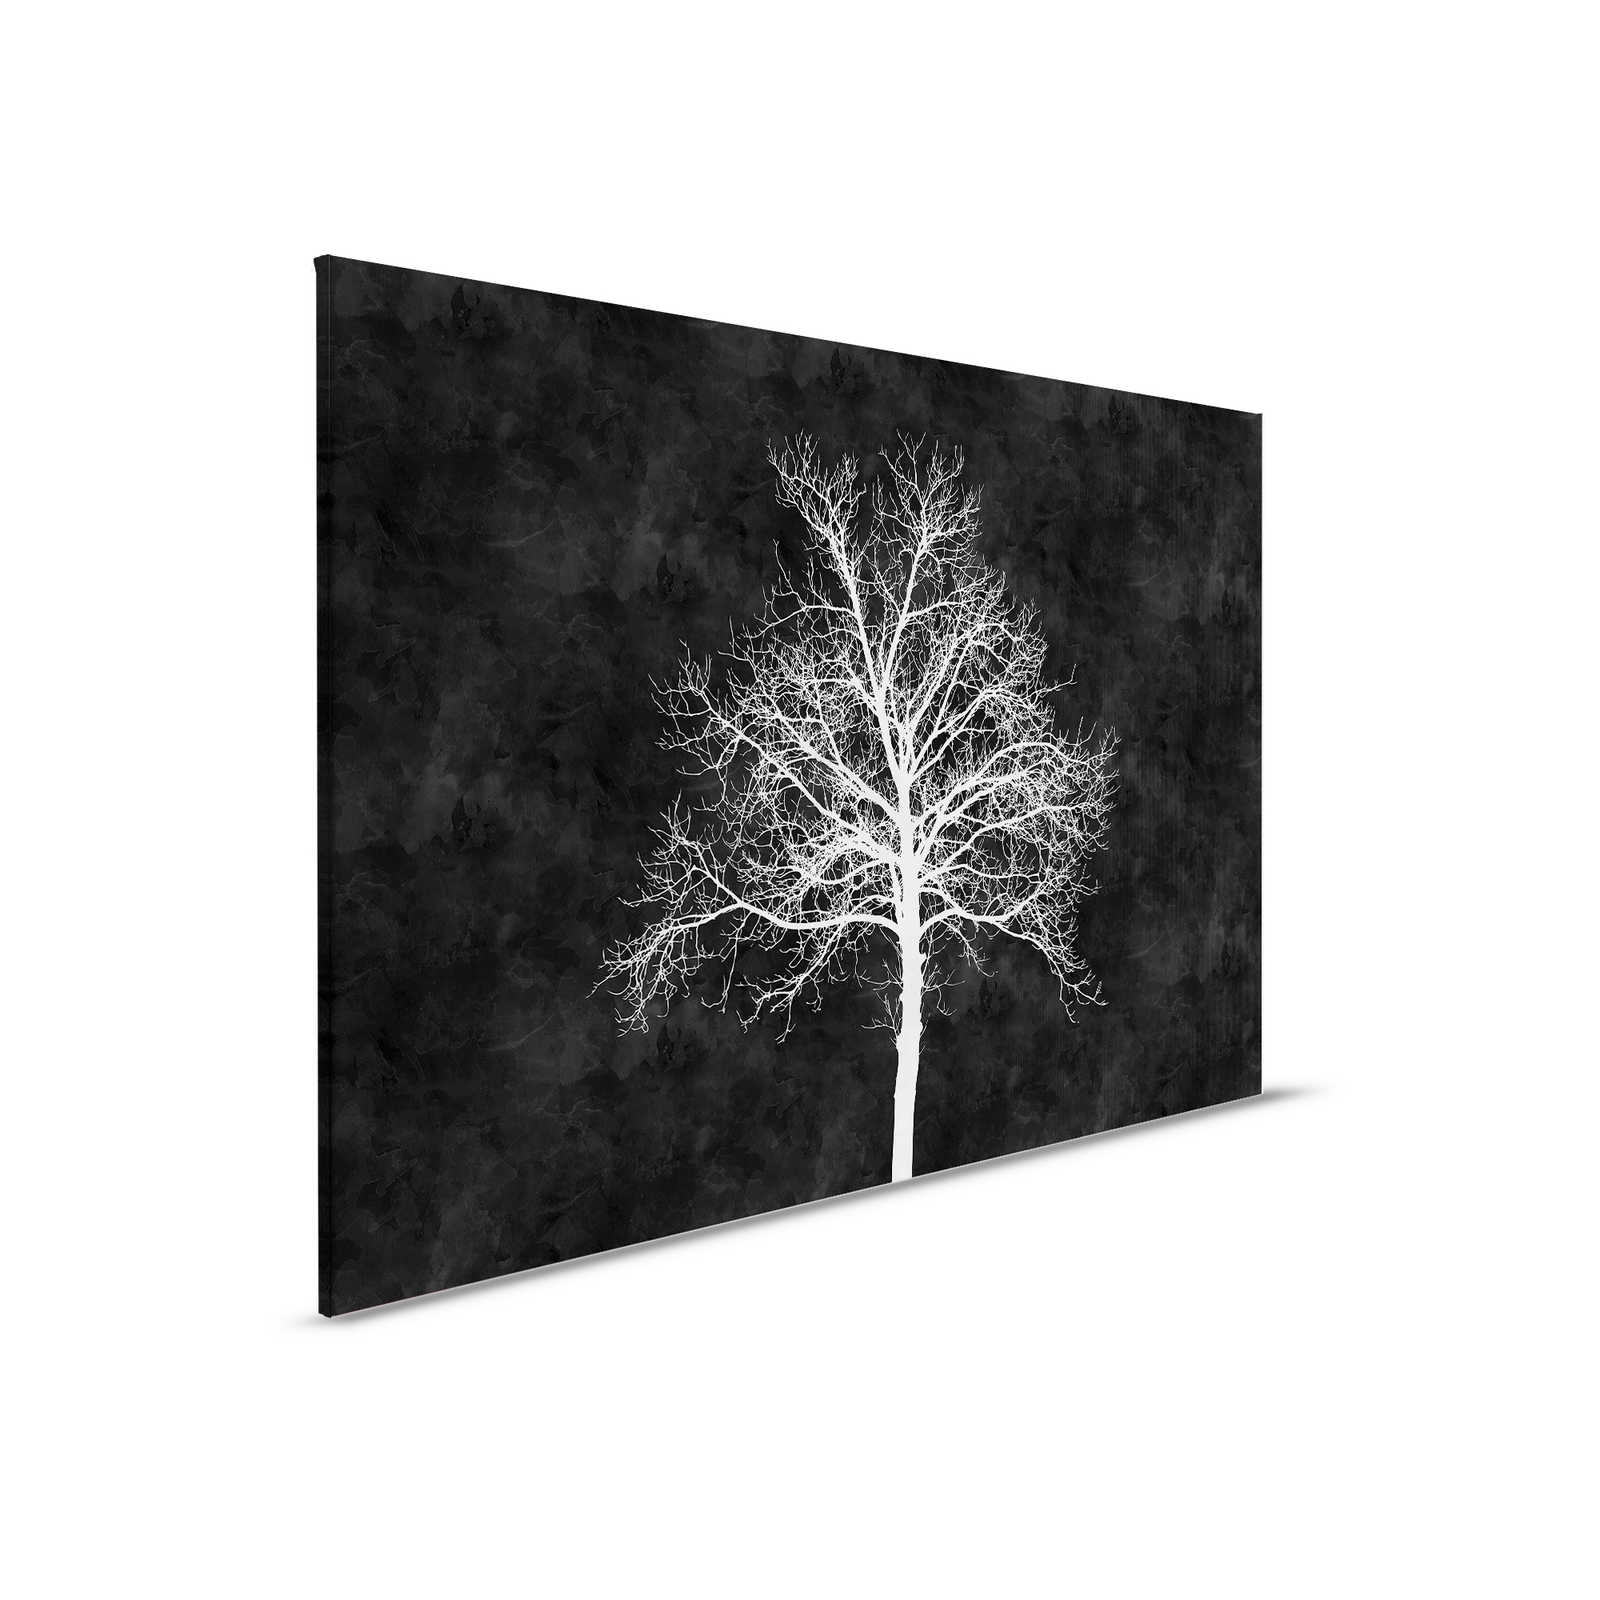         Black and White Canvas Painting White Tree - 0.90 m x 0.60 m
    